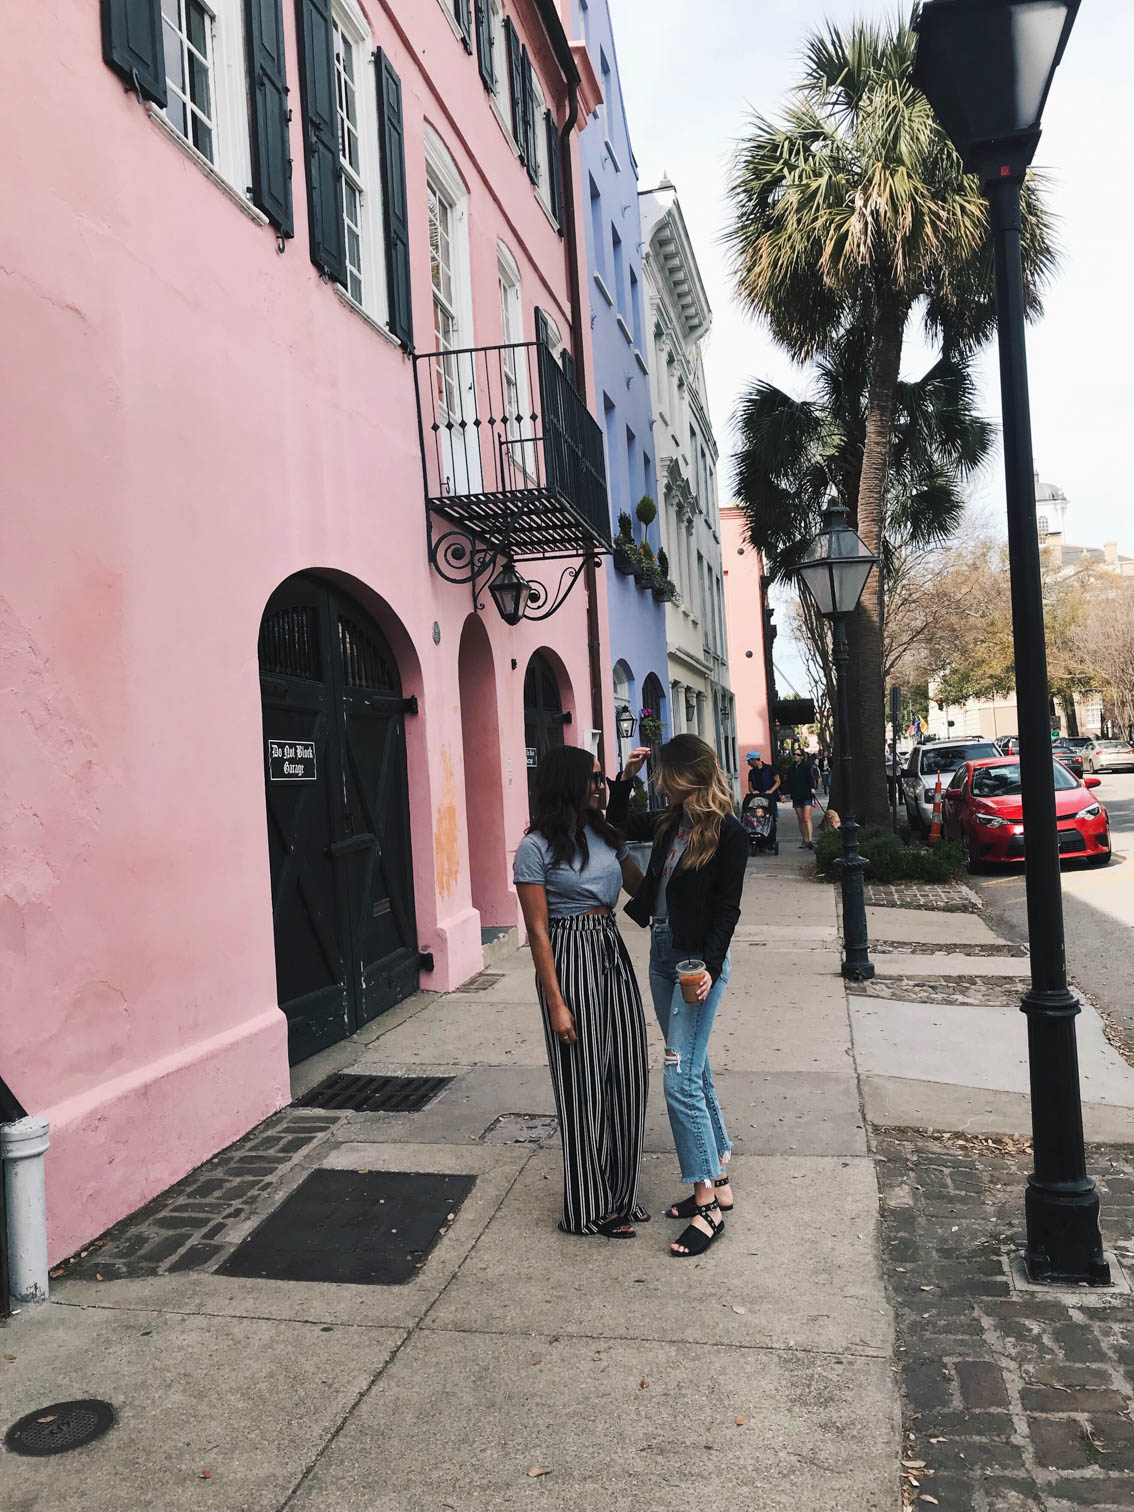 A First-Timer's Guide to Visiting Charleston, South Carolina: Best restaurants and bars, things to do, places to see during a long weekend trip to Charleston